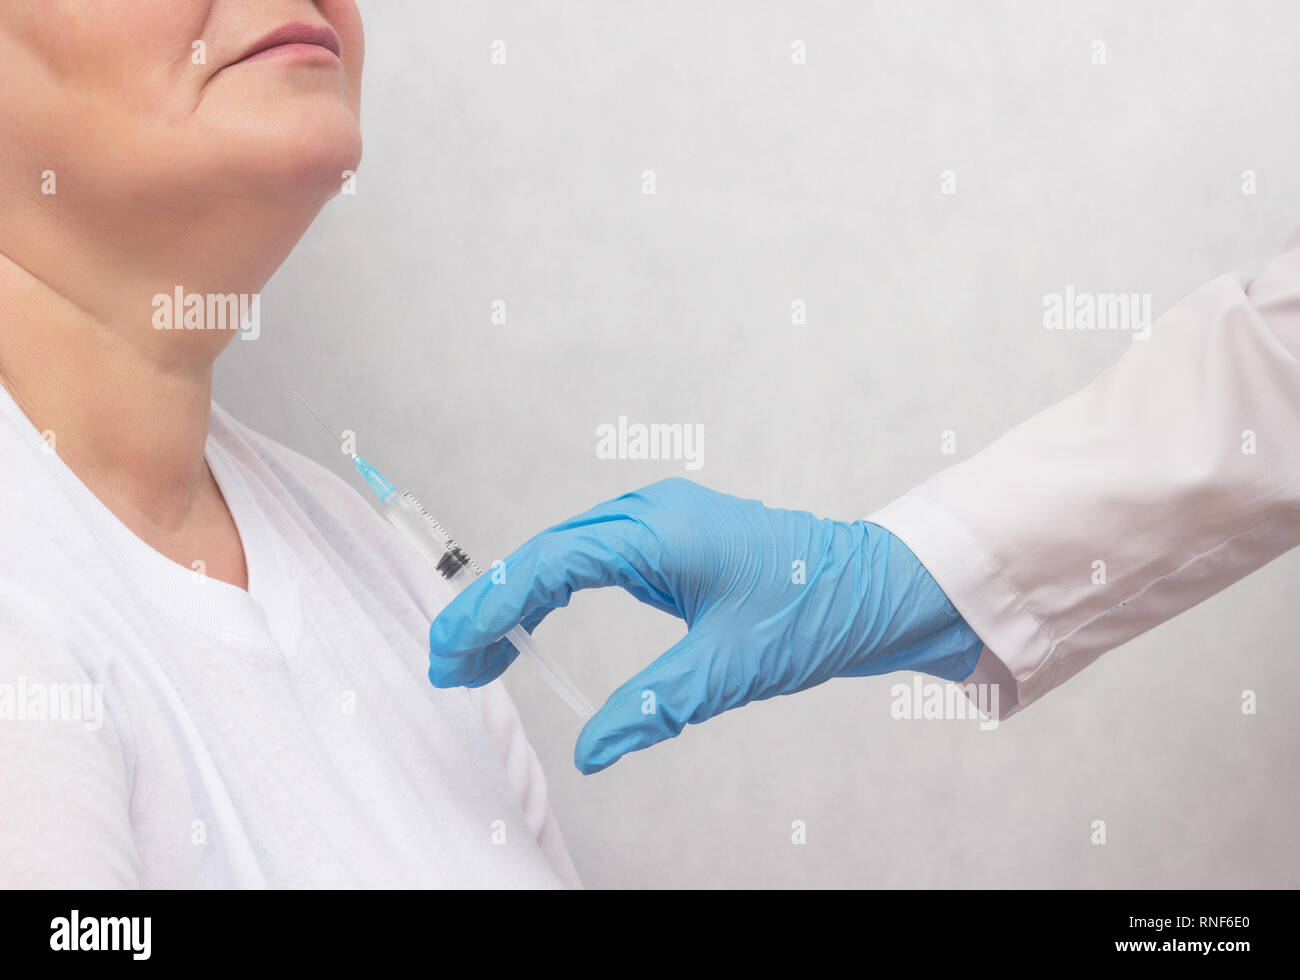 The doctor makes the woman puncture the thyroid gland to clarify the diagnosis, cancer, copy space, hypothyroidism, fine needle biopsy Stock Photo